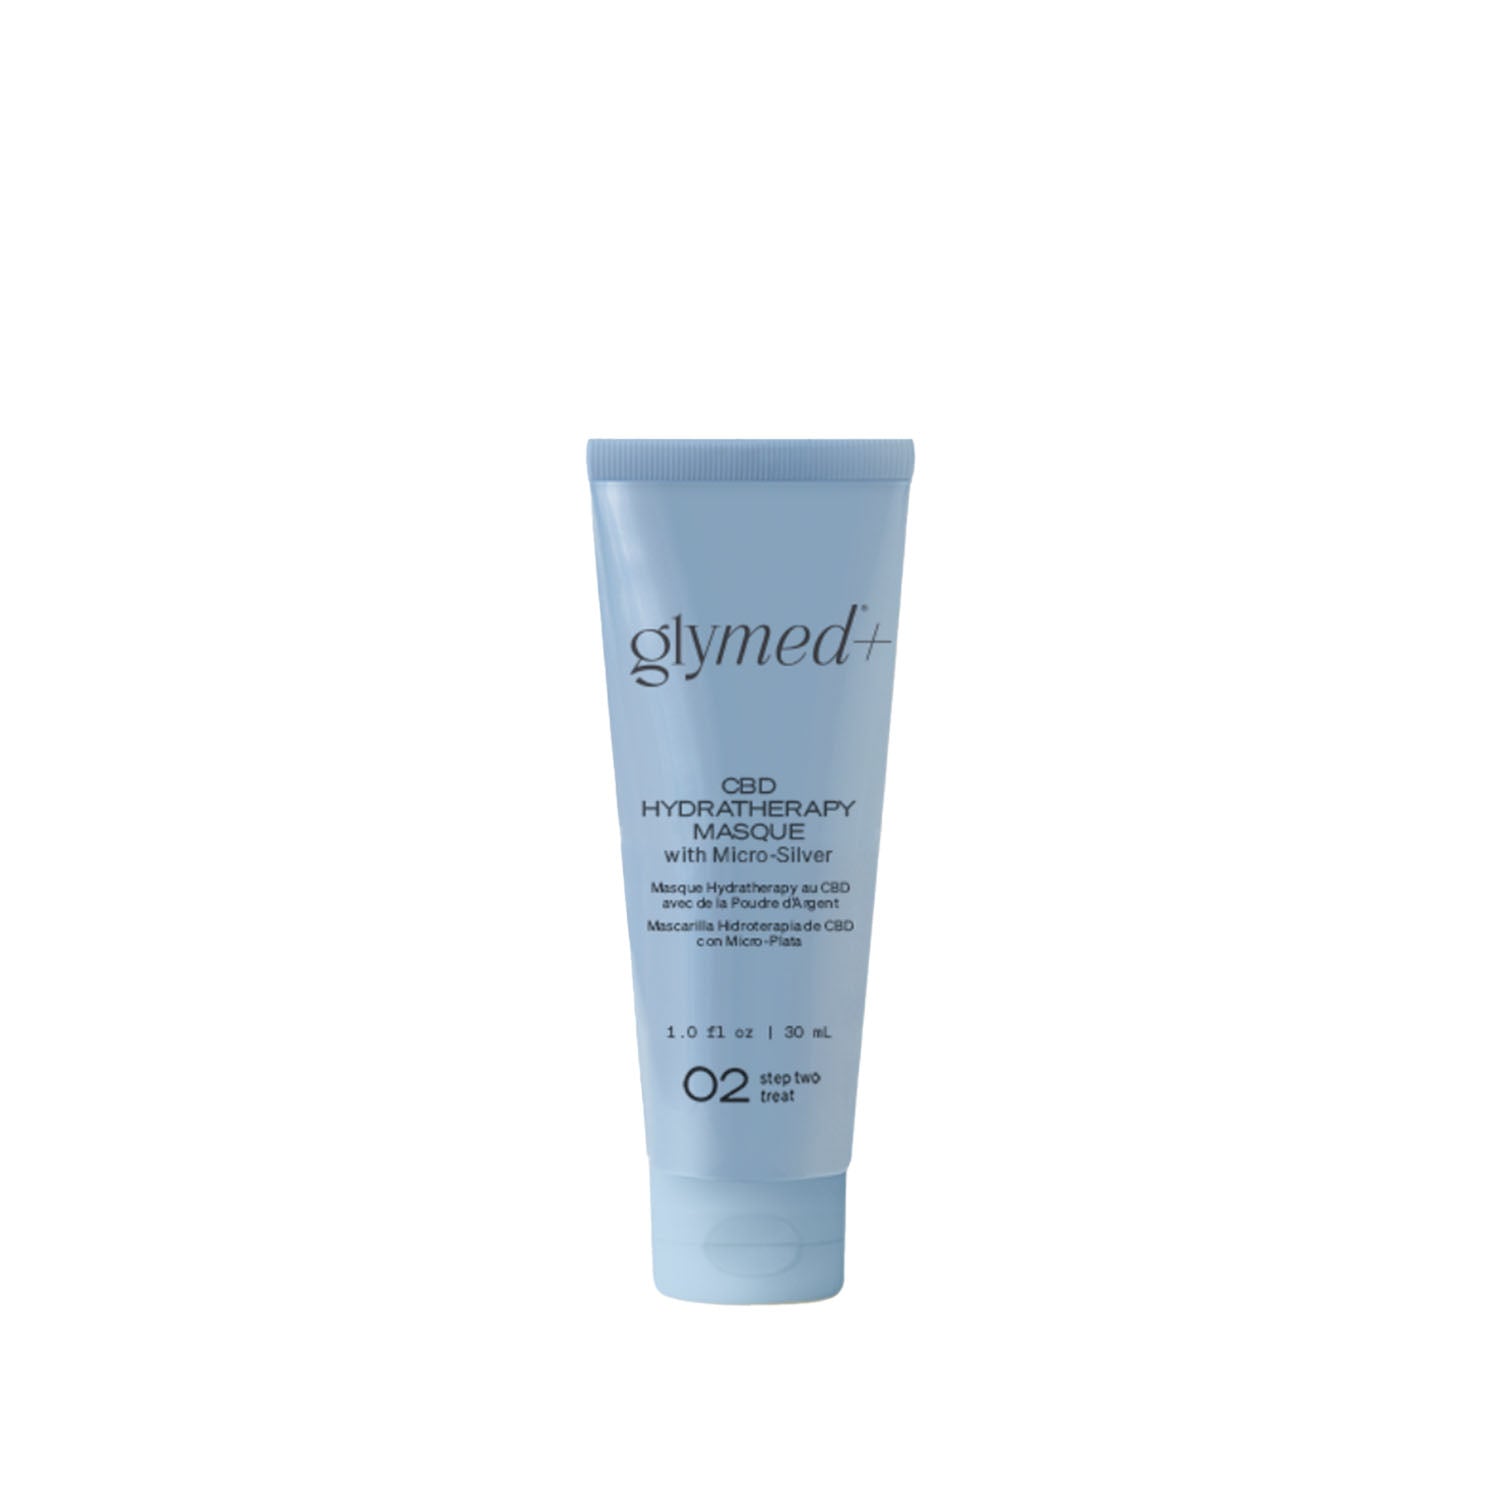 glymed+ CBD Hydratherapy Masque With Micro-Silver